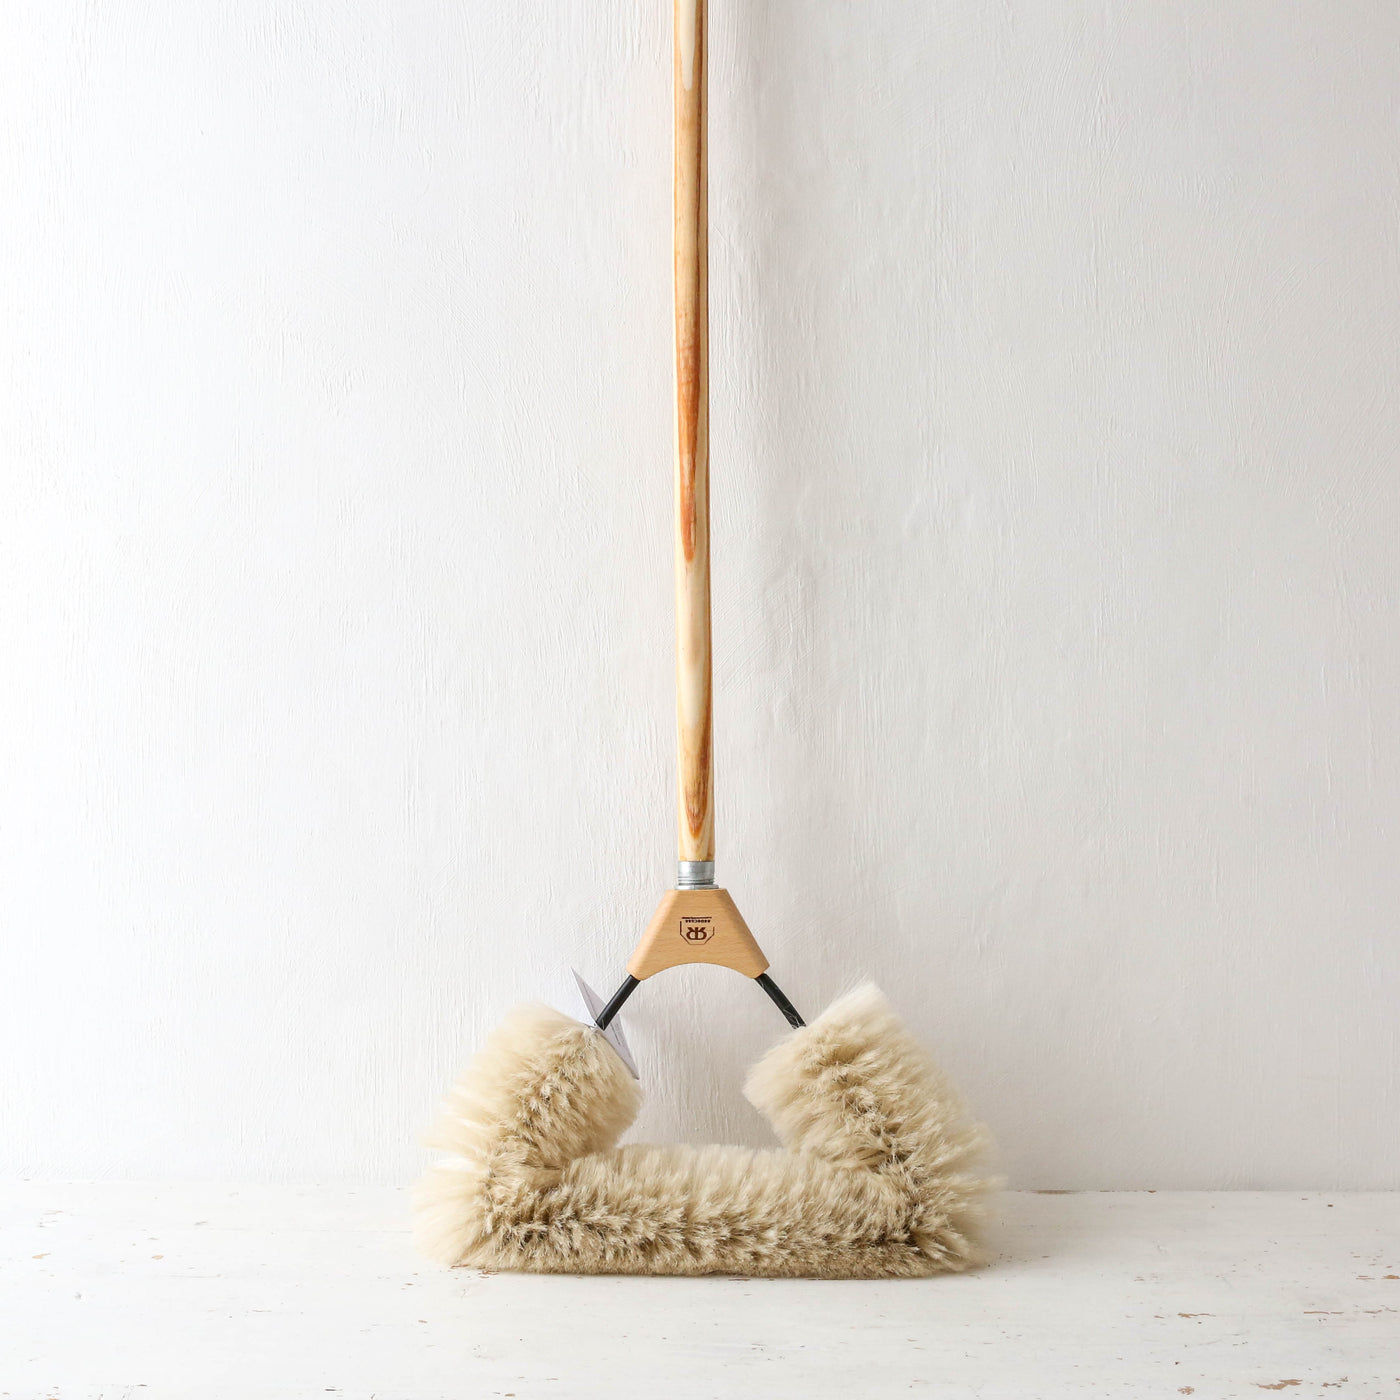 Dust Broom - Local Pick Up Only